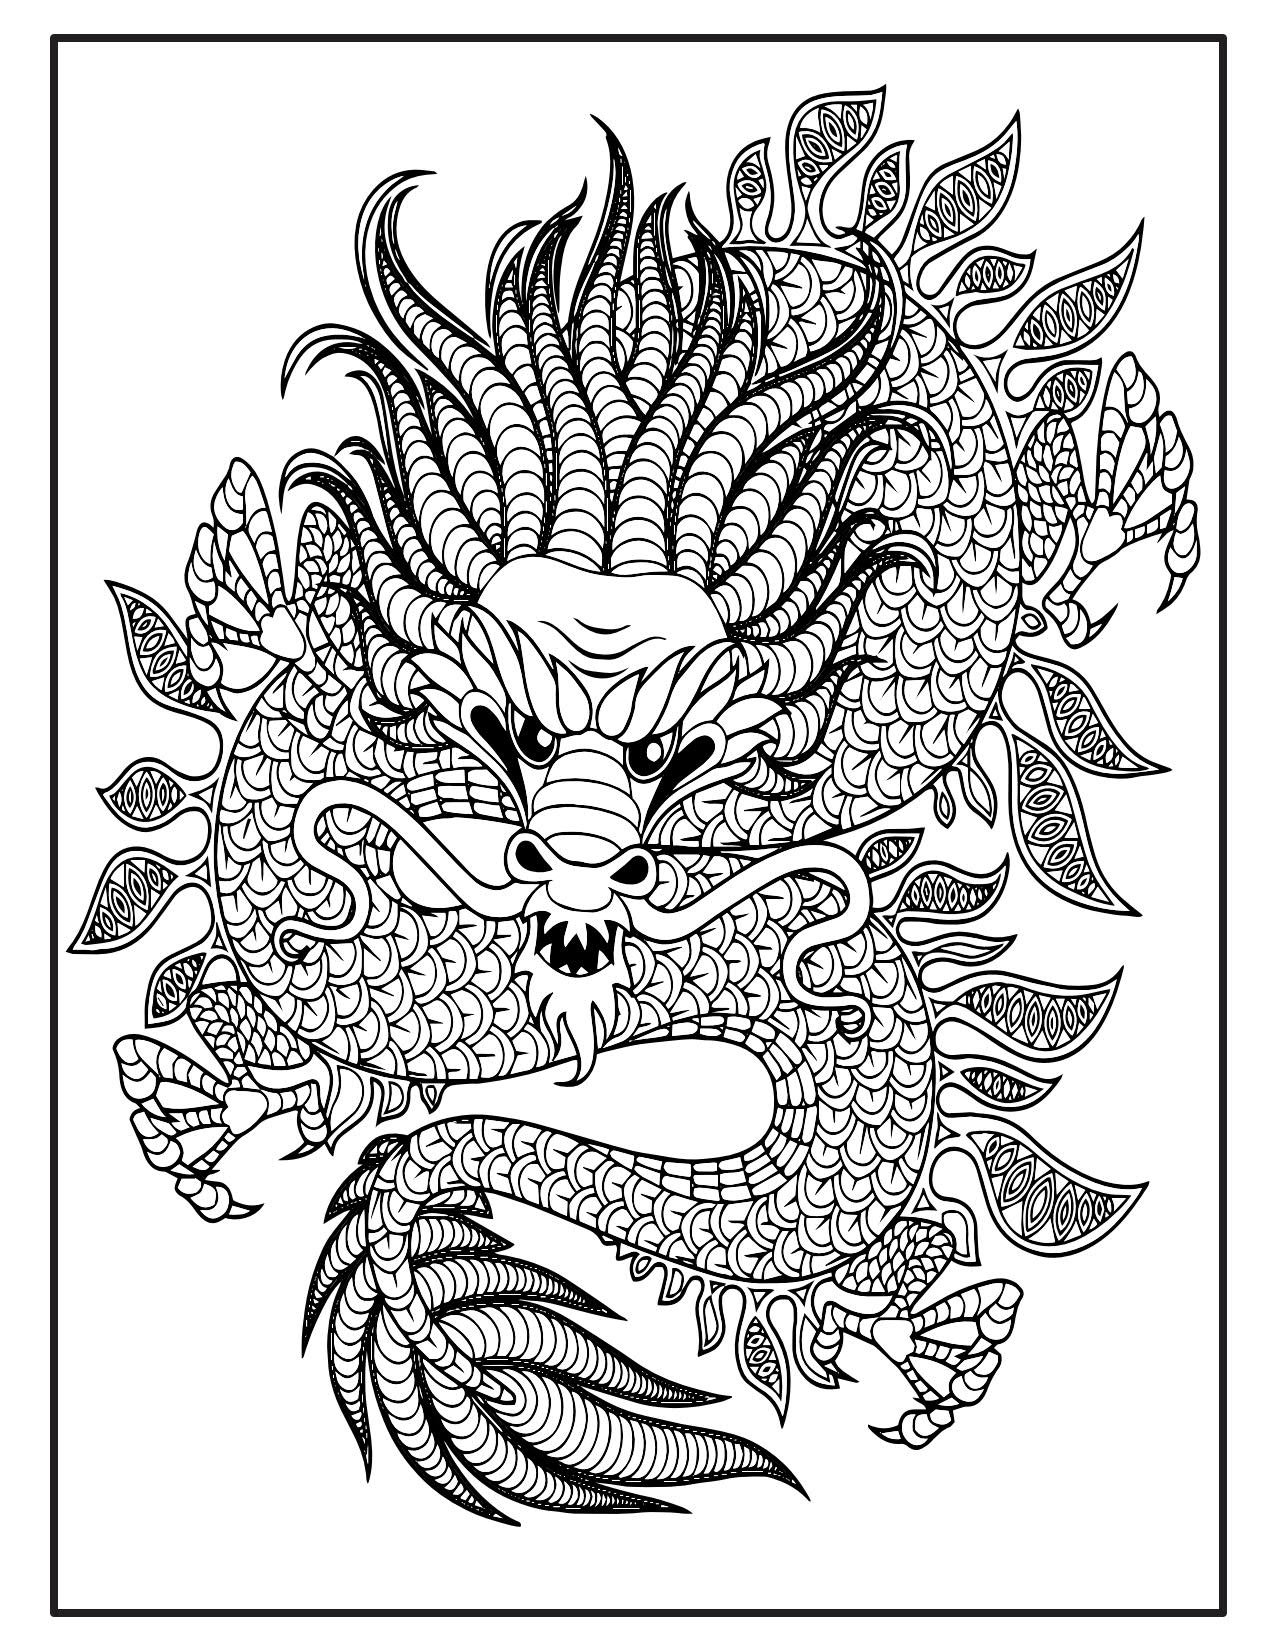 Dragons Coloring Book Pages for Adults Printable Dragon   Etsy